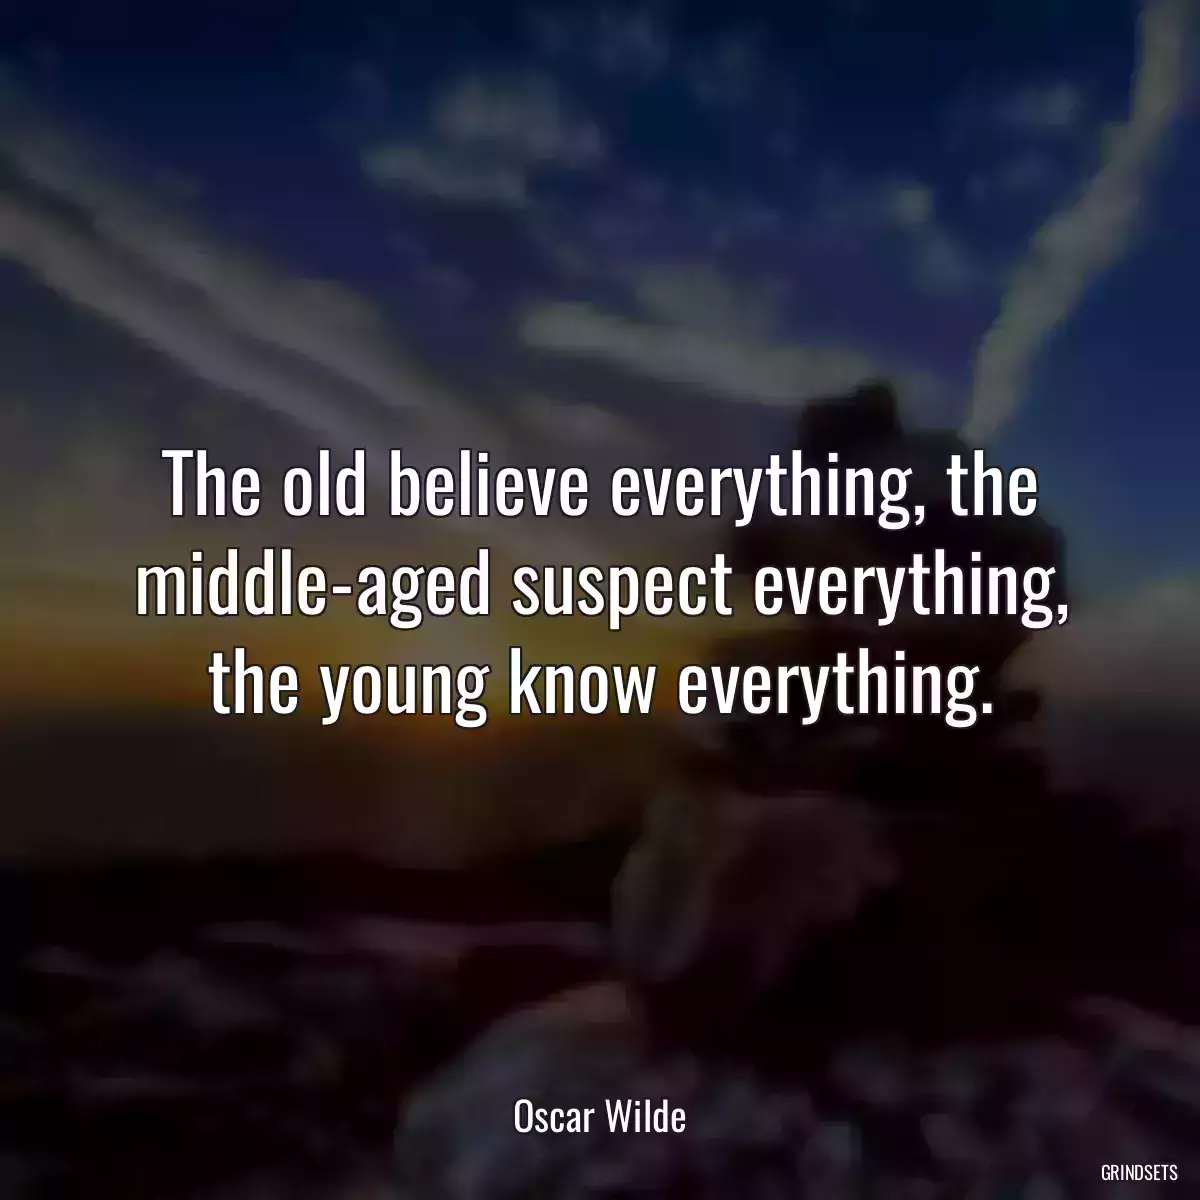 The old believe everything, the middle-aged suspect everything, the young know everything.